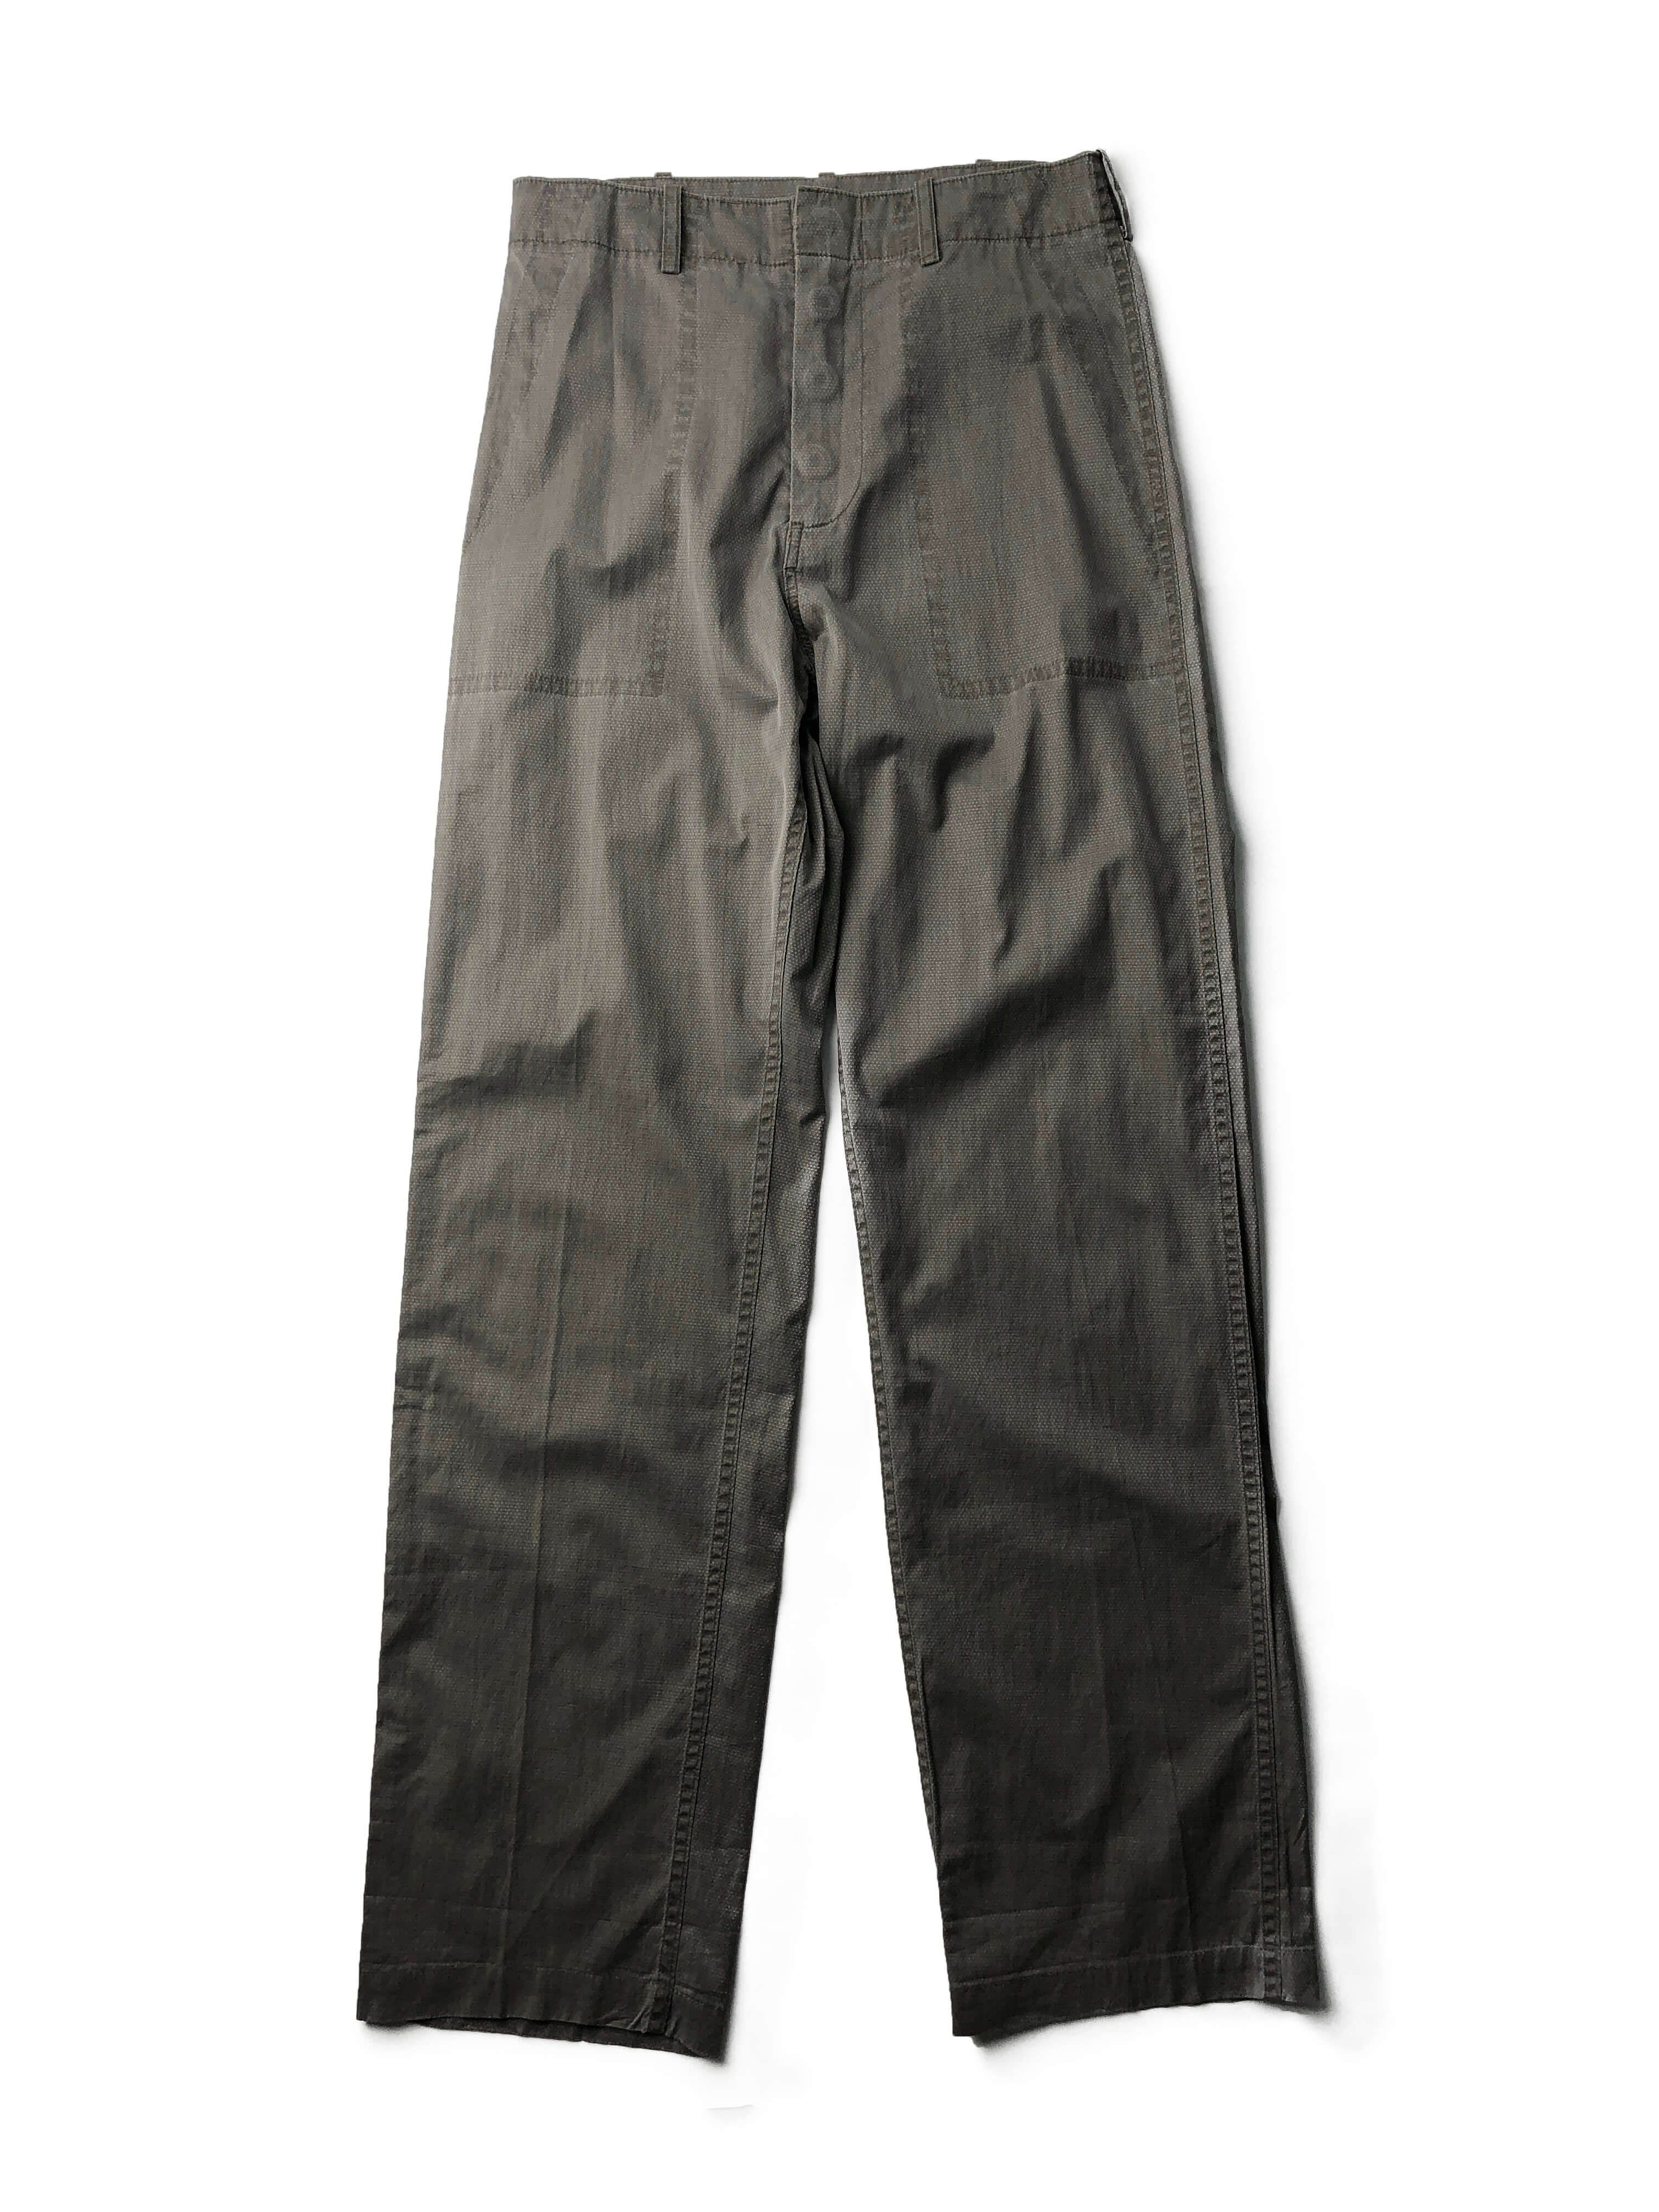 UNDER COVER 99ss &#039;RELIEF&#039; pants